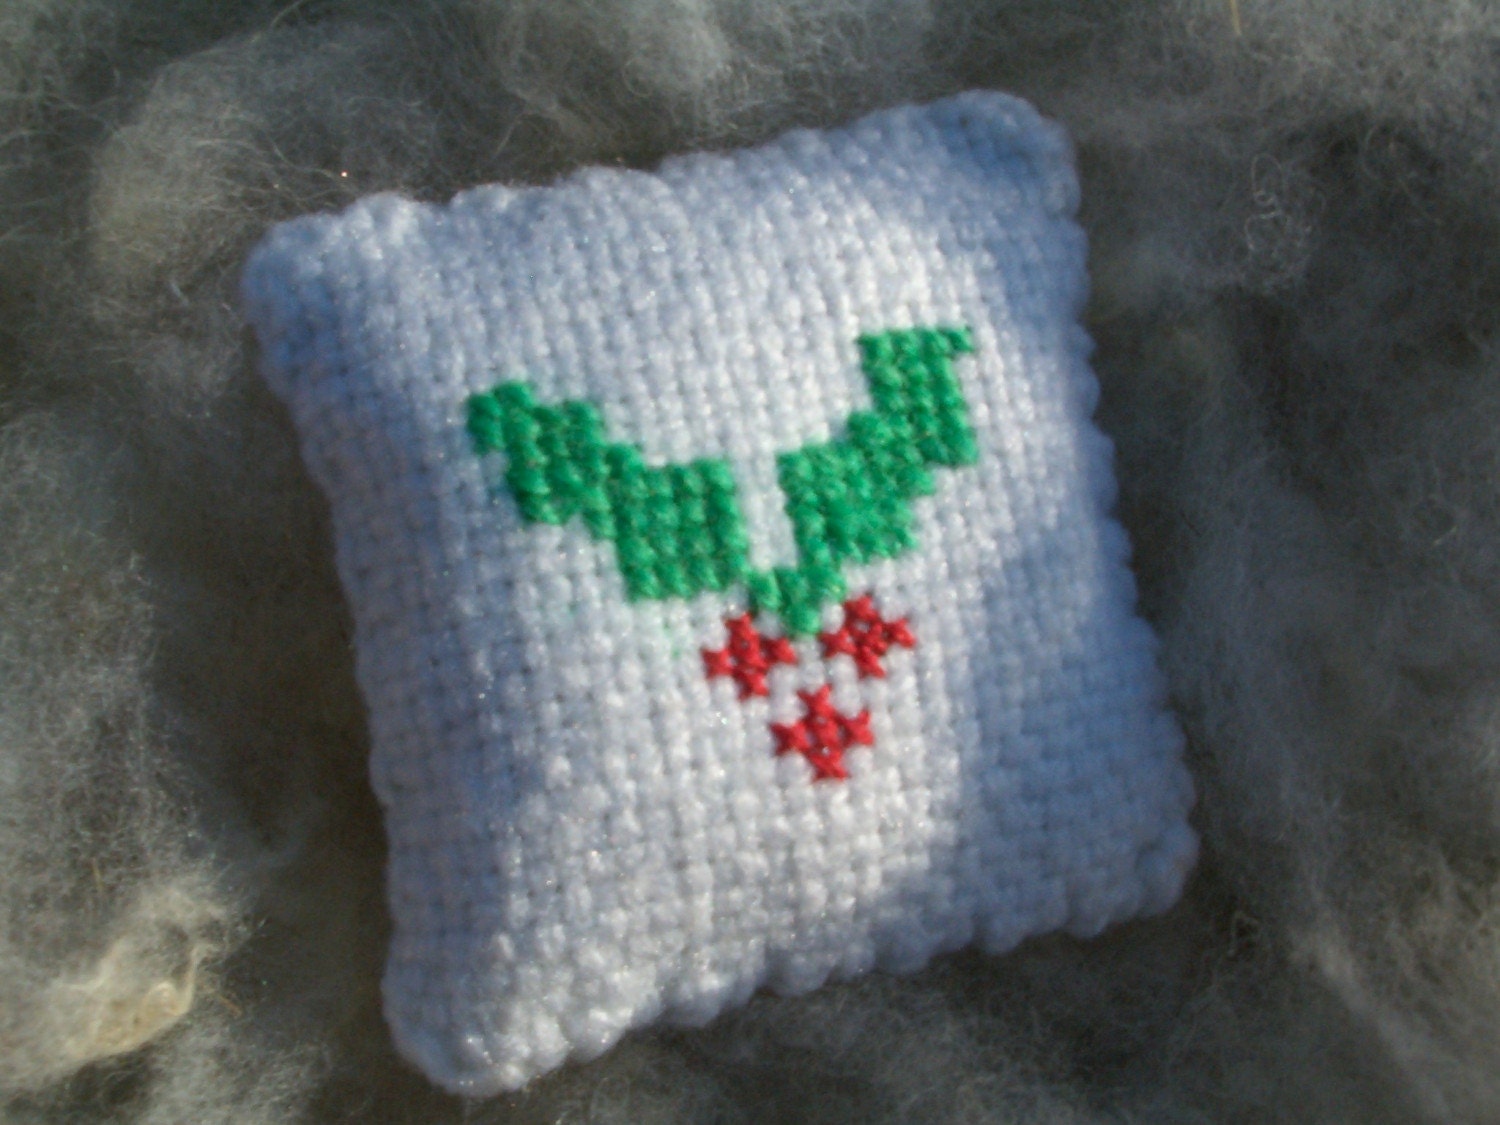 Woven Balsam Sachet - Holly leaves and berries